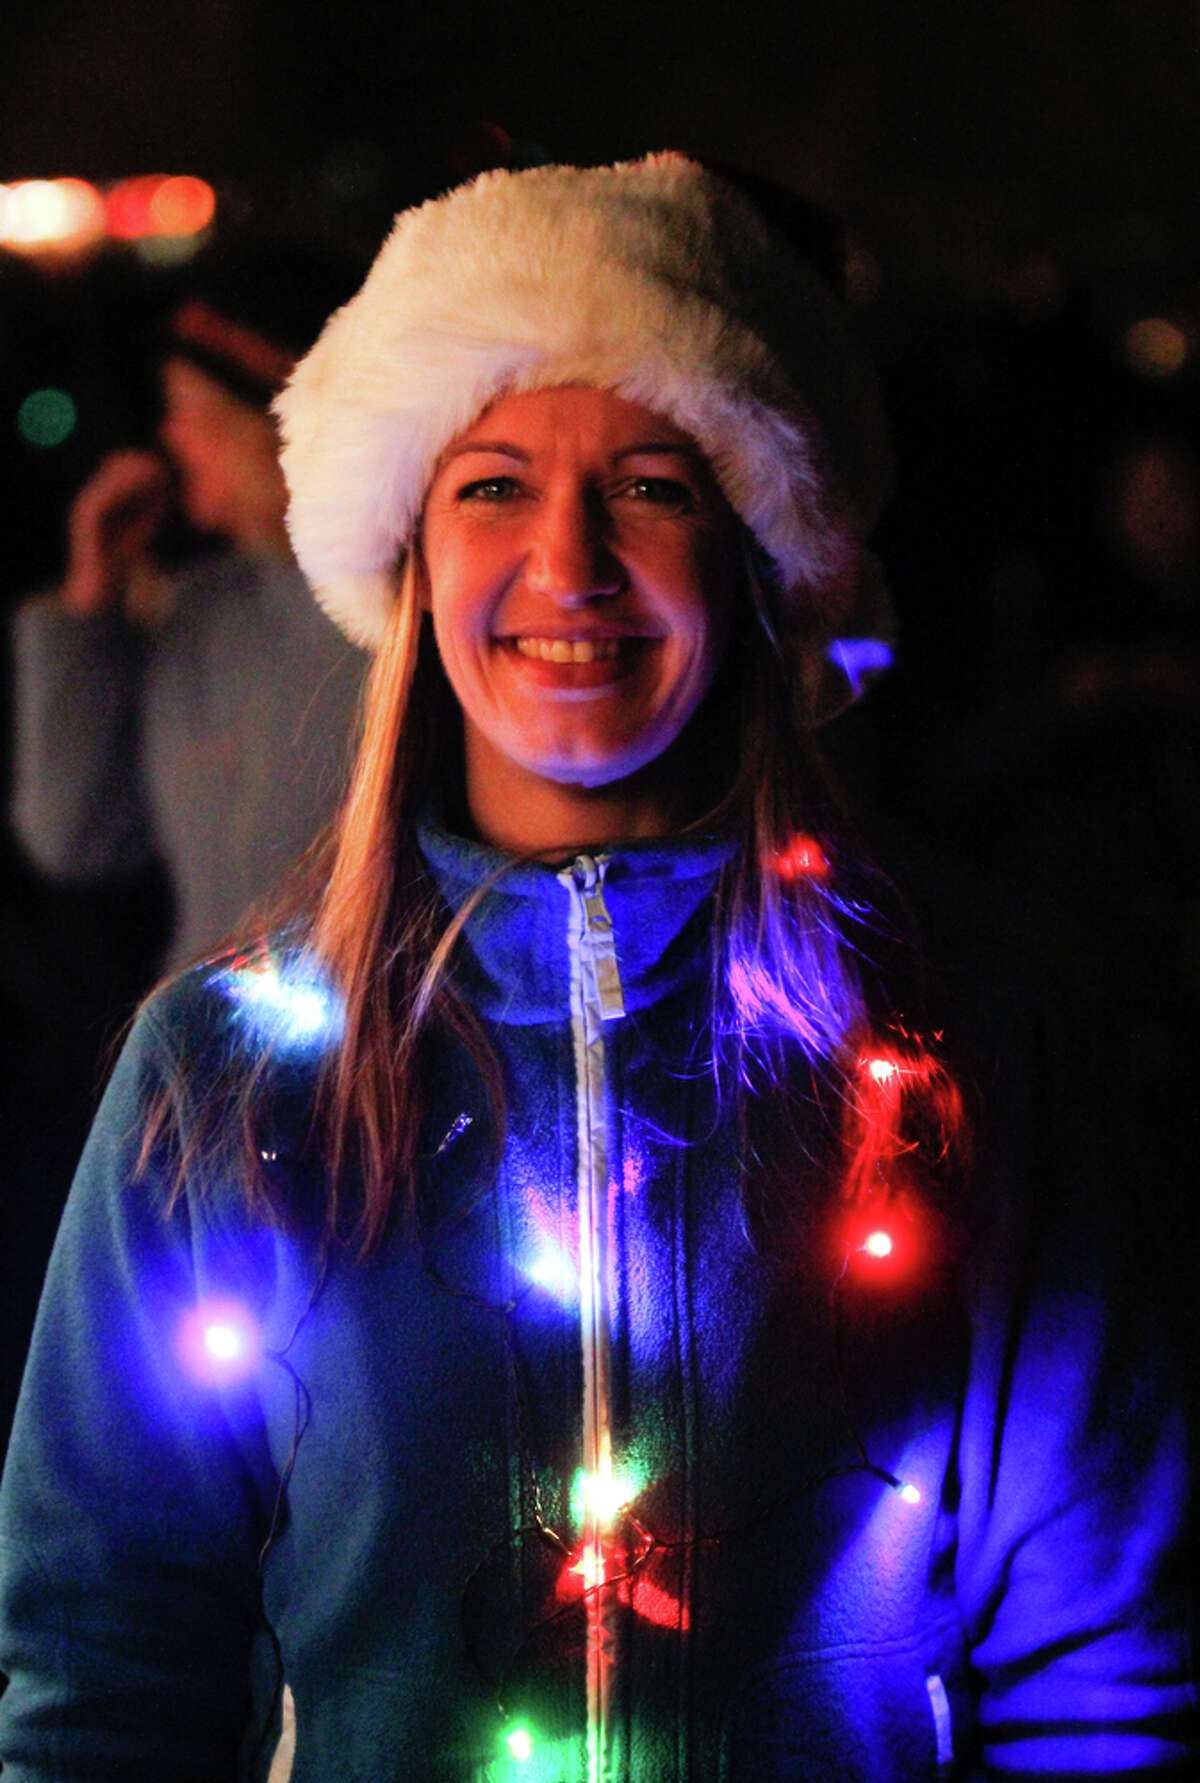 Sarah Jane wears festive lights at the Green Lake Pathway of Light celebration at Green Lake Trail in Seattle on Saturday, Dec. 10, 2011. She has been coming for the last 17 years, each year thousands gather to walk around the lake and listen to holiday performances. Many people wear holiday lights or adorn their dogs in them and walk around the lake. This event has been held in Seattle for the past 35 years.